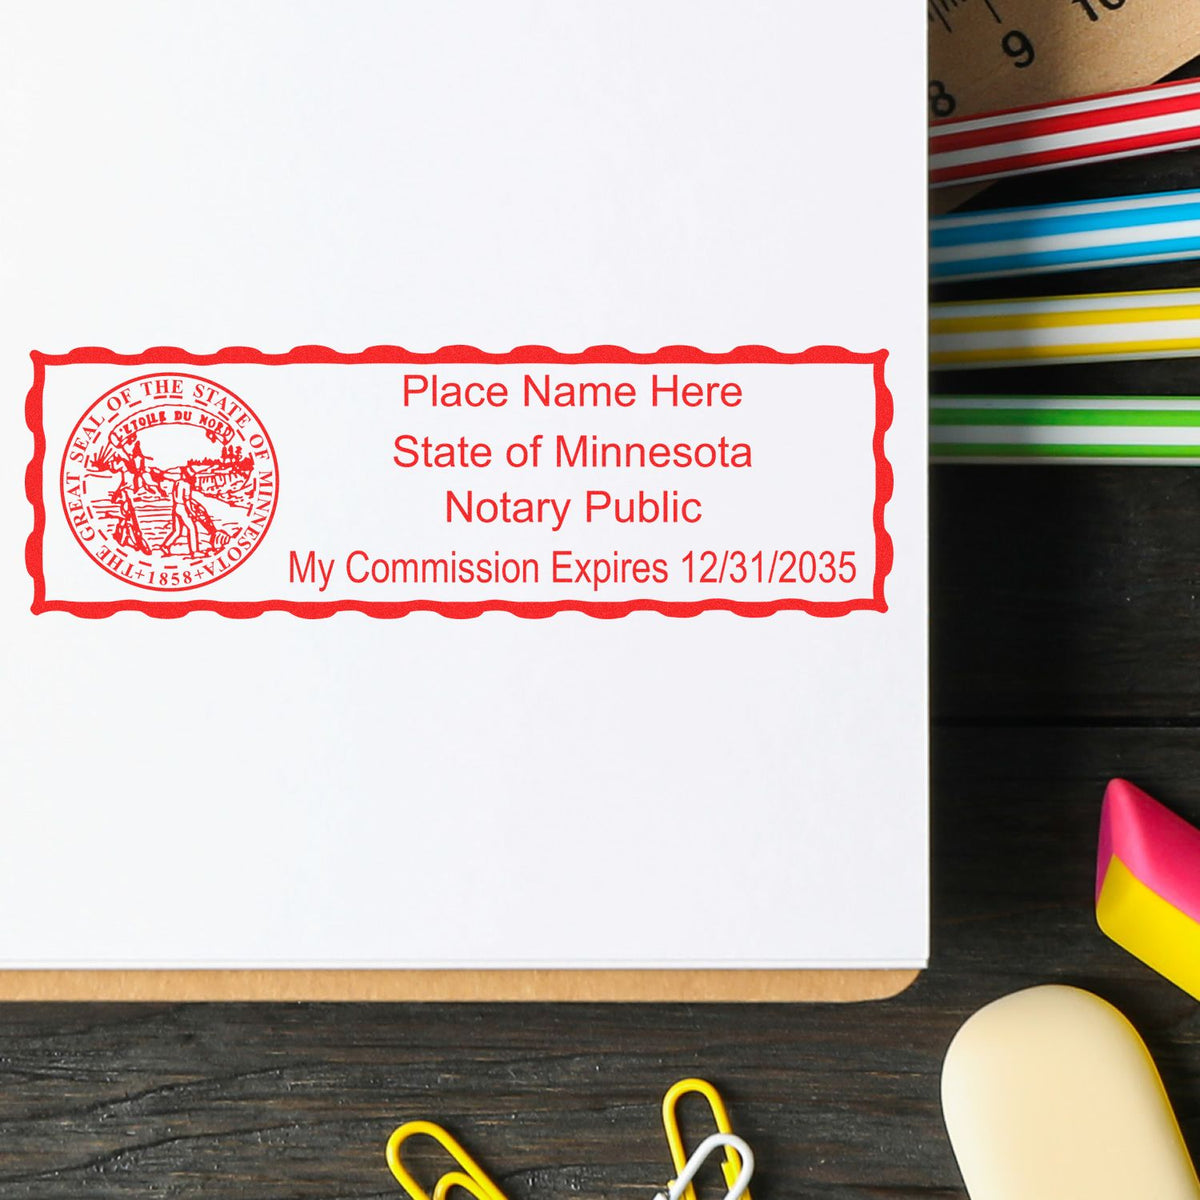 The Heavy-Duty Minnesota Rectangular Notary Stamp stamp impression comes to life with a crisp, detailed photo on paper - showcasing true professional quality.